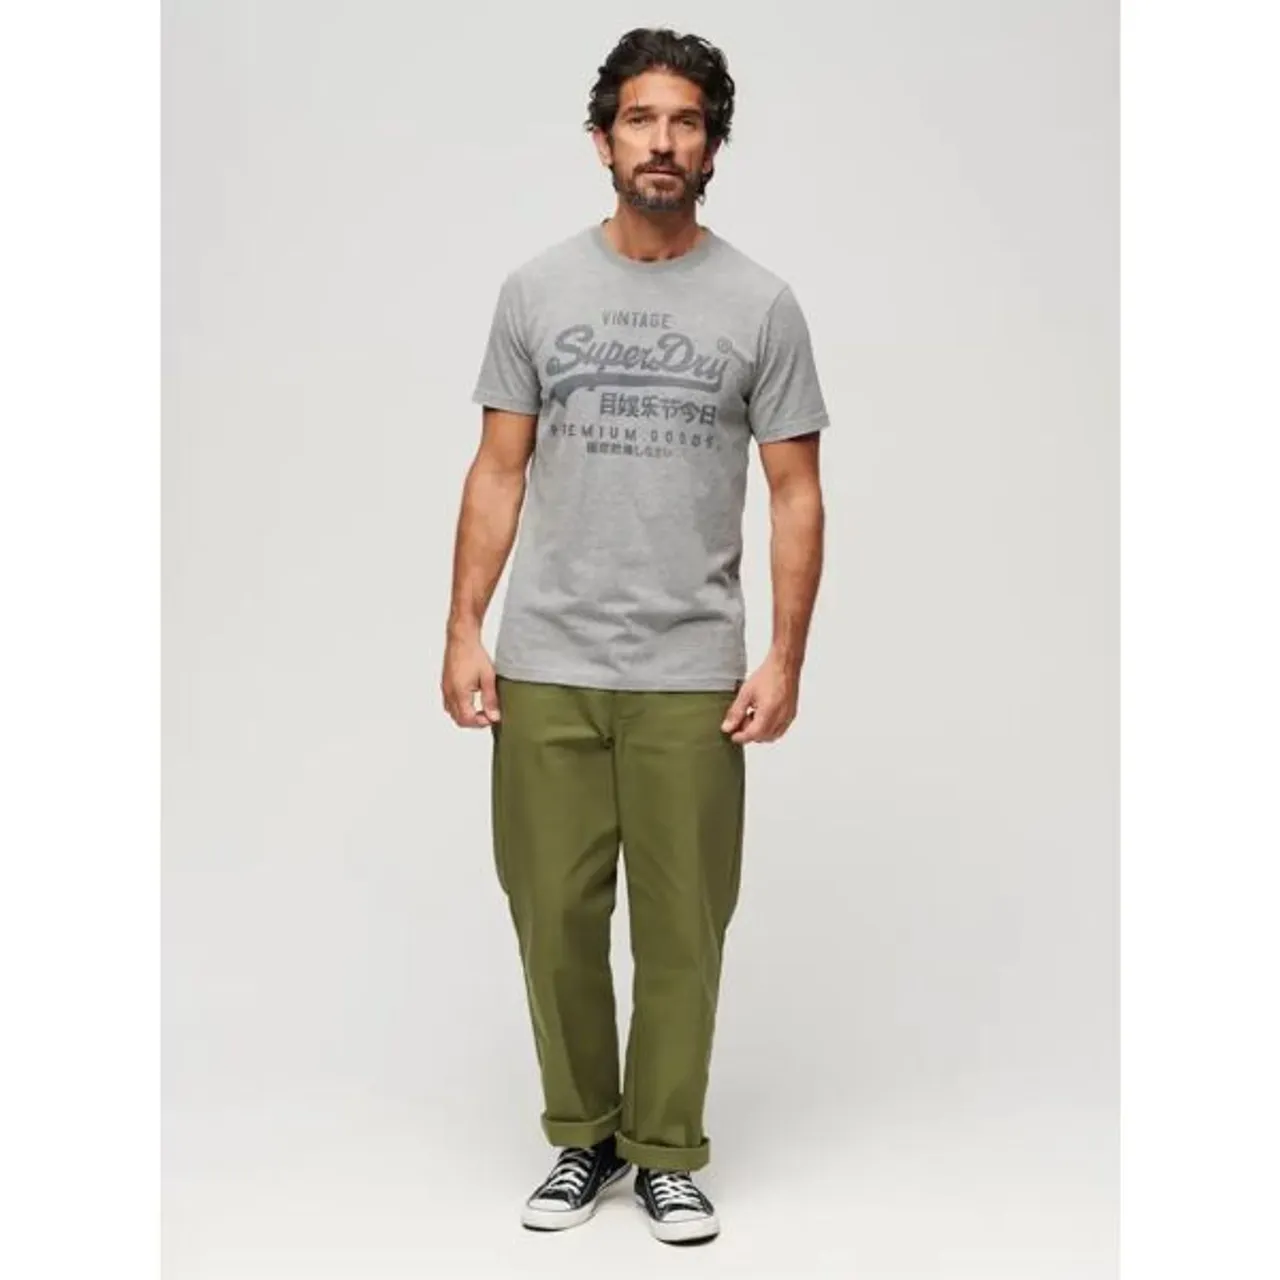 Superdry Classic Heritage T-Shirt - Ash Grey Marl - Male